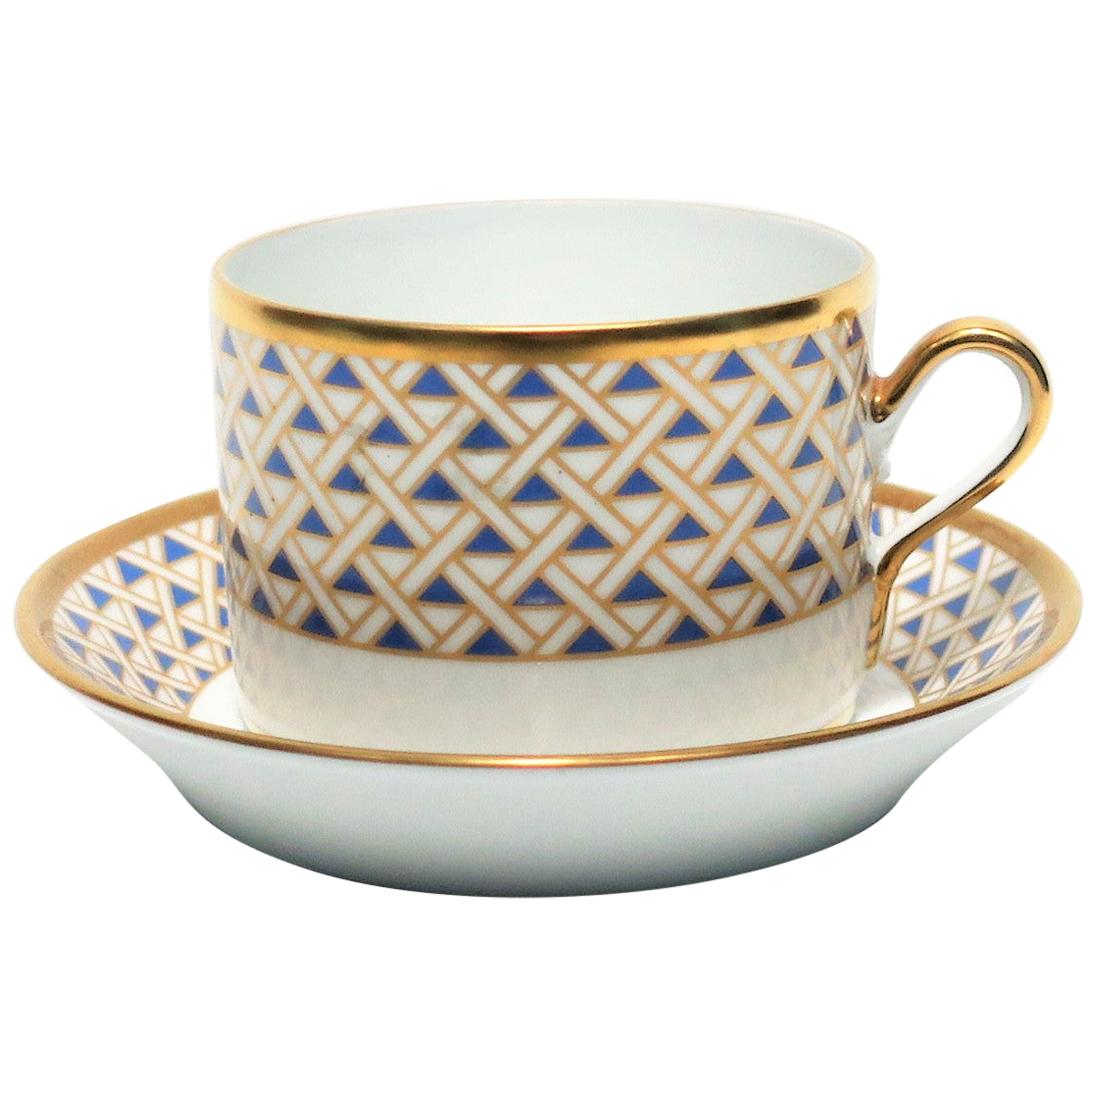 Designer Richard Ginori Italian Coffee or Tea Cup and Saucer in Blue and Gold